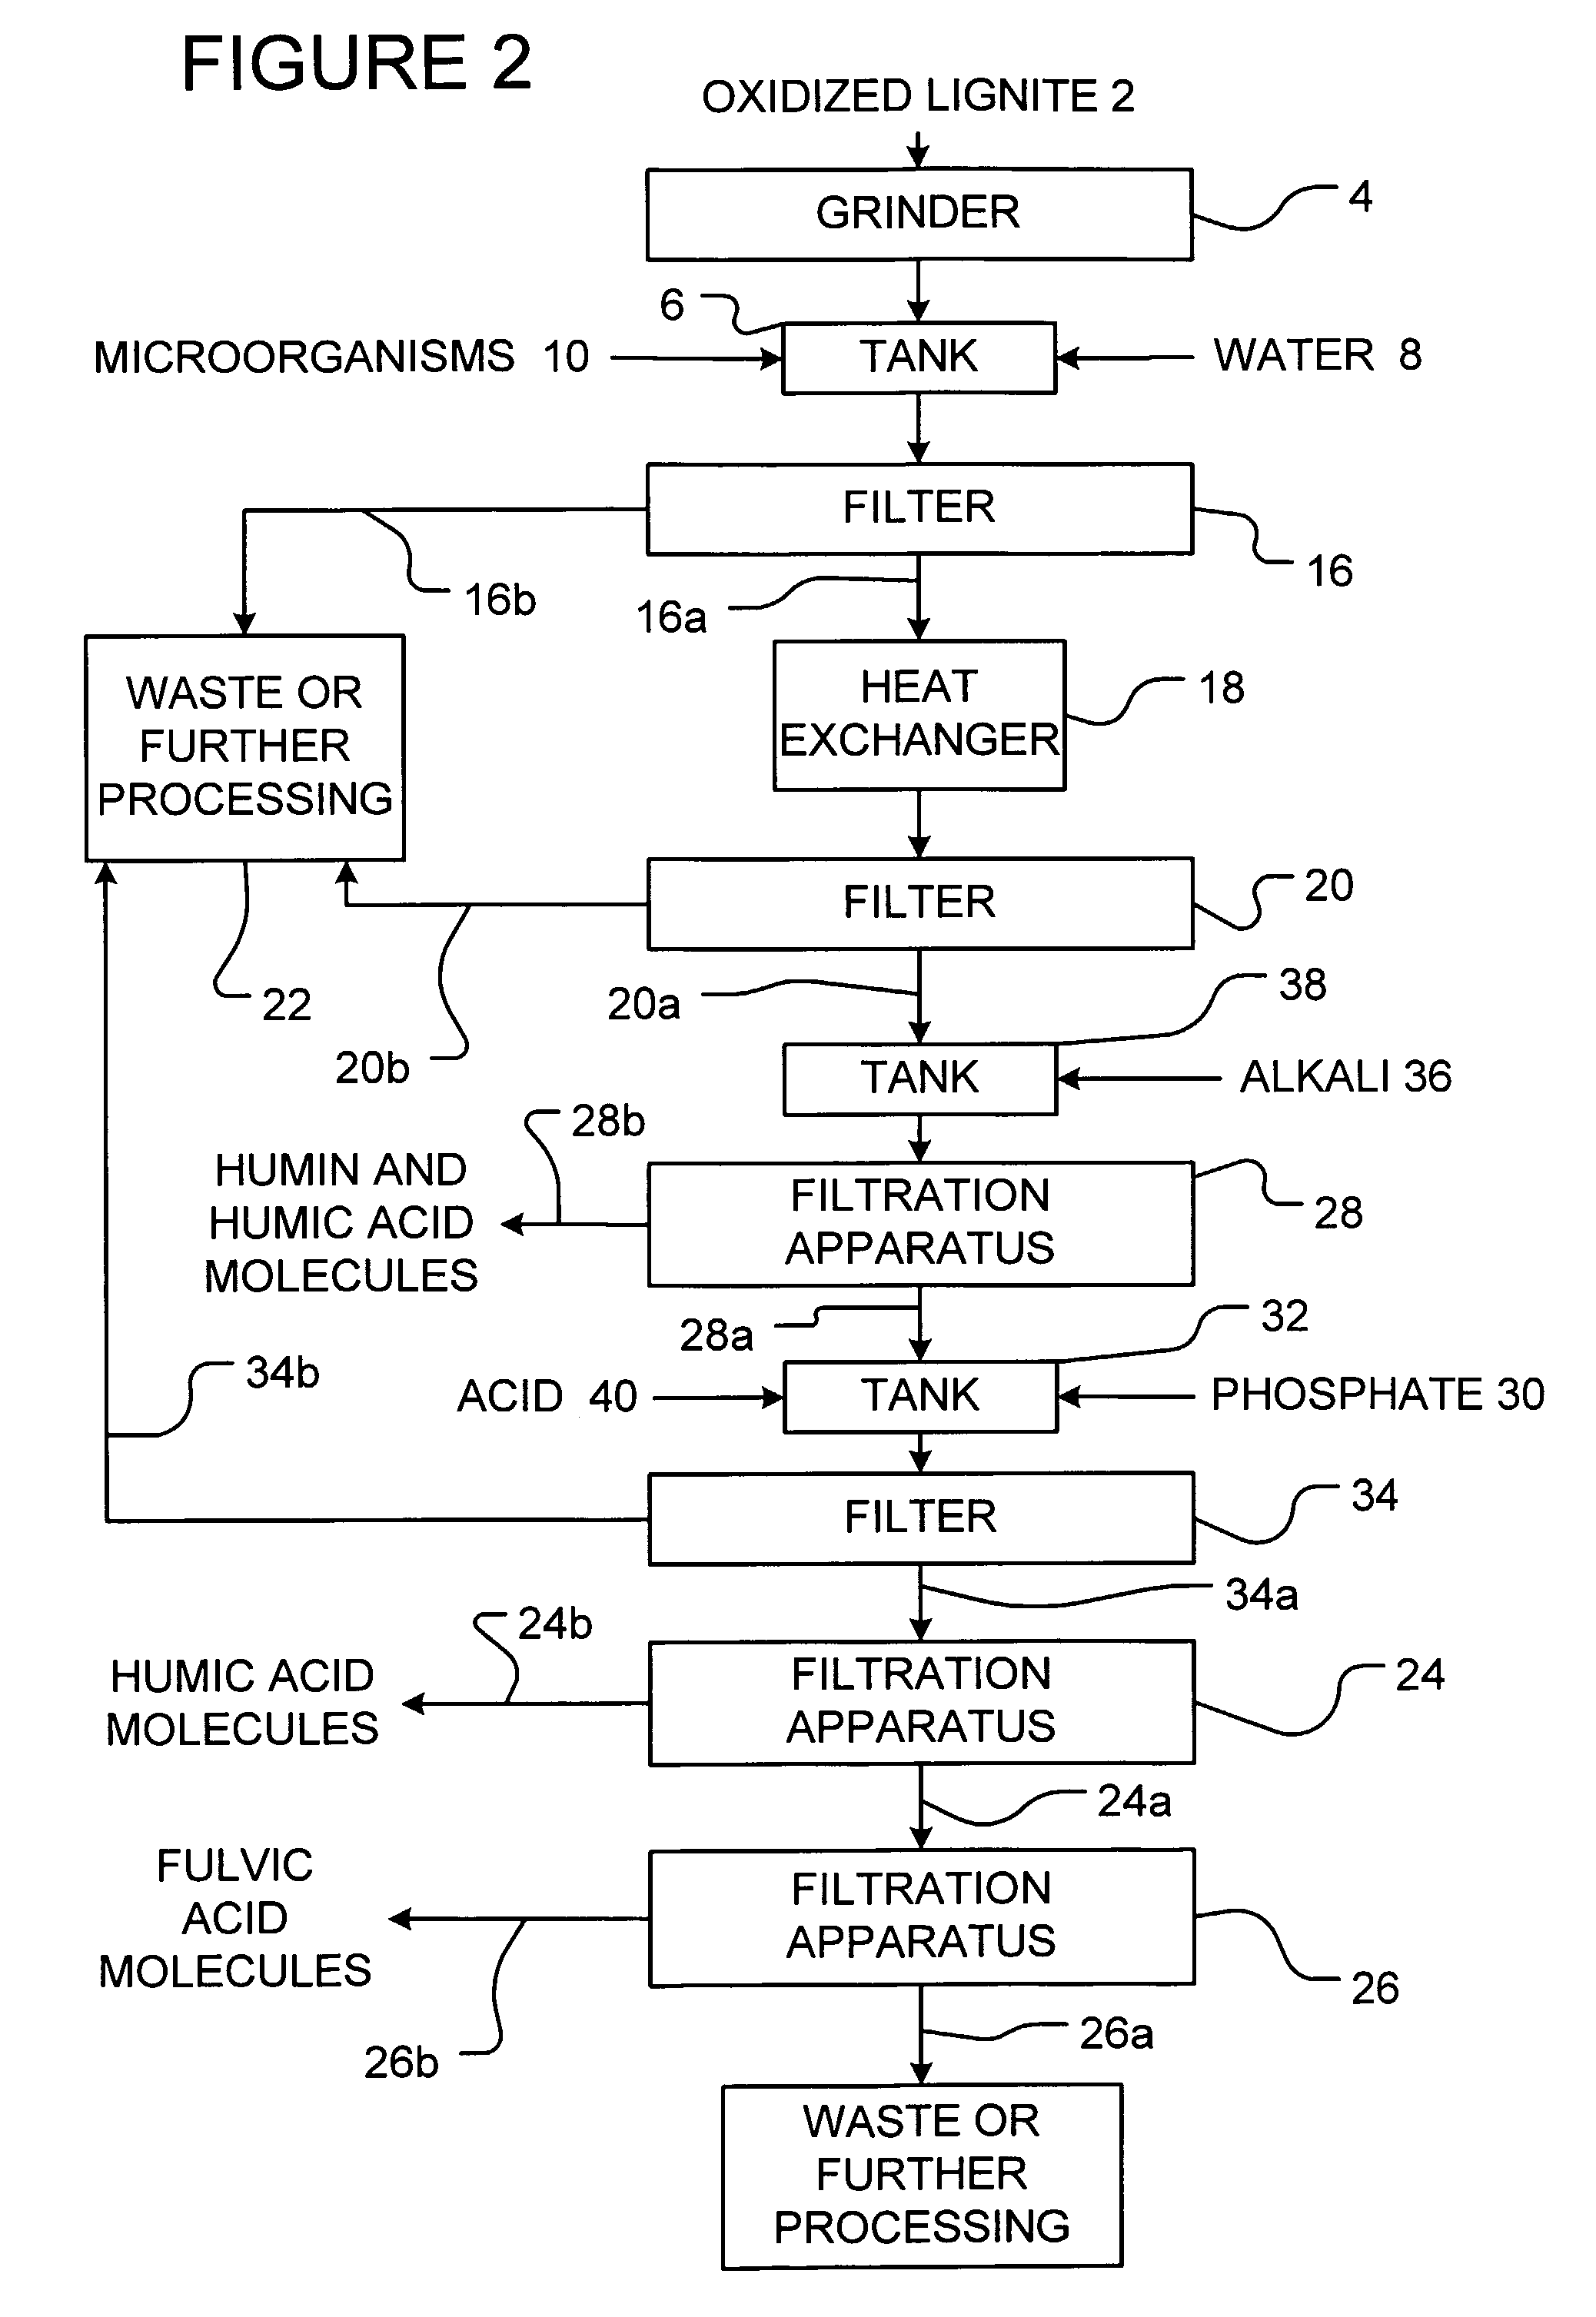 Method for extracting fulvic acid molecules